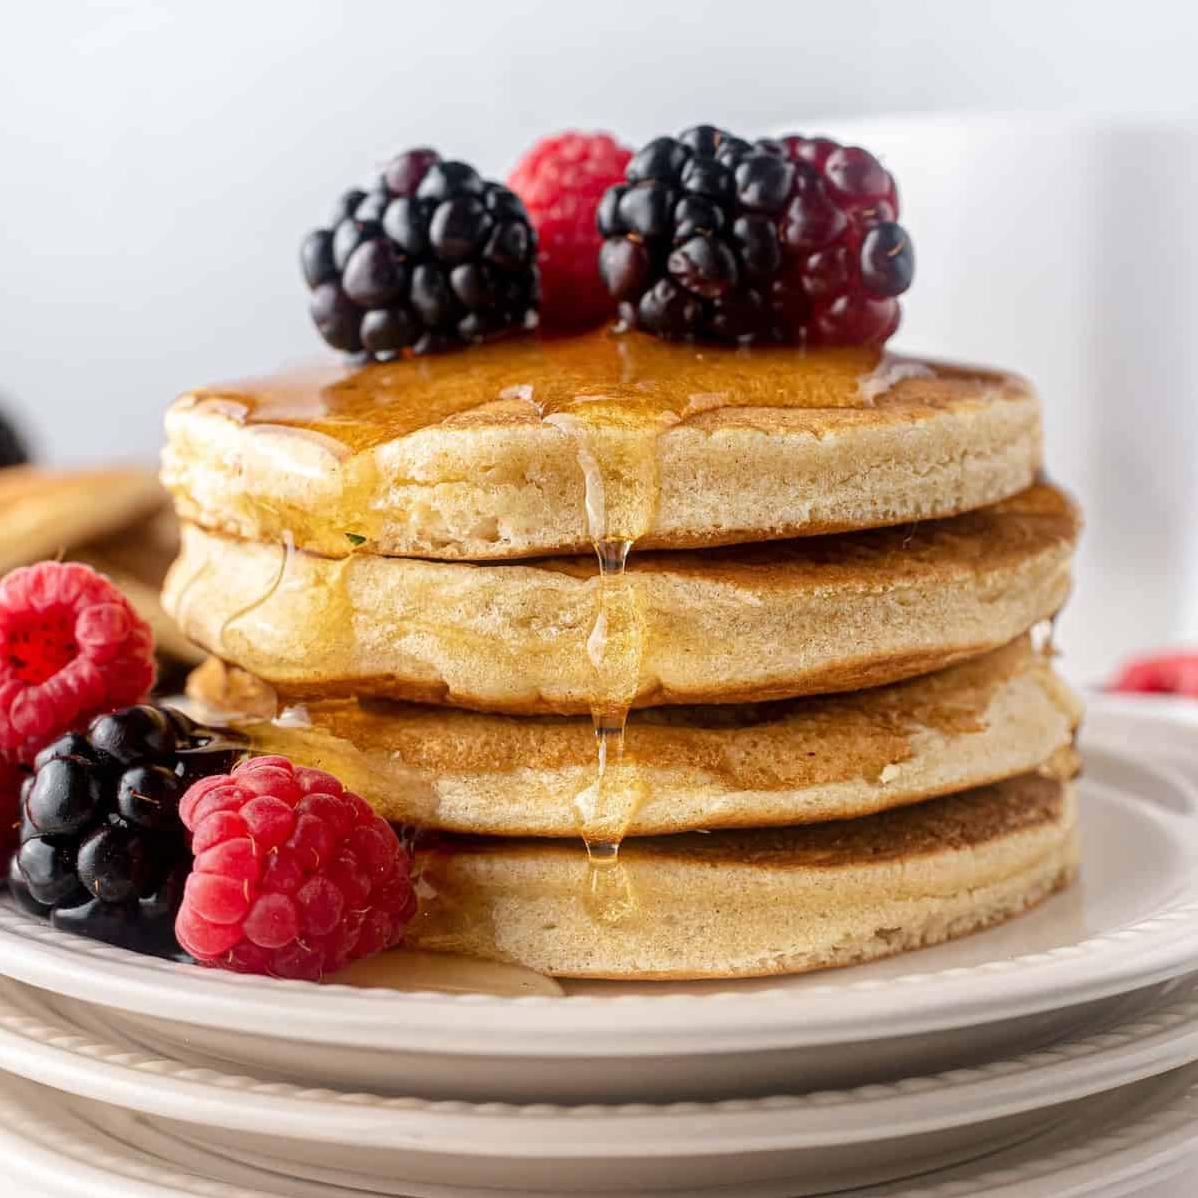  Say goodbye to dull pancakes! These will add some sunshine to your morning.